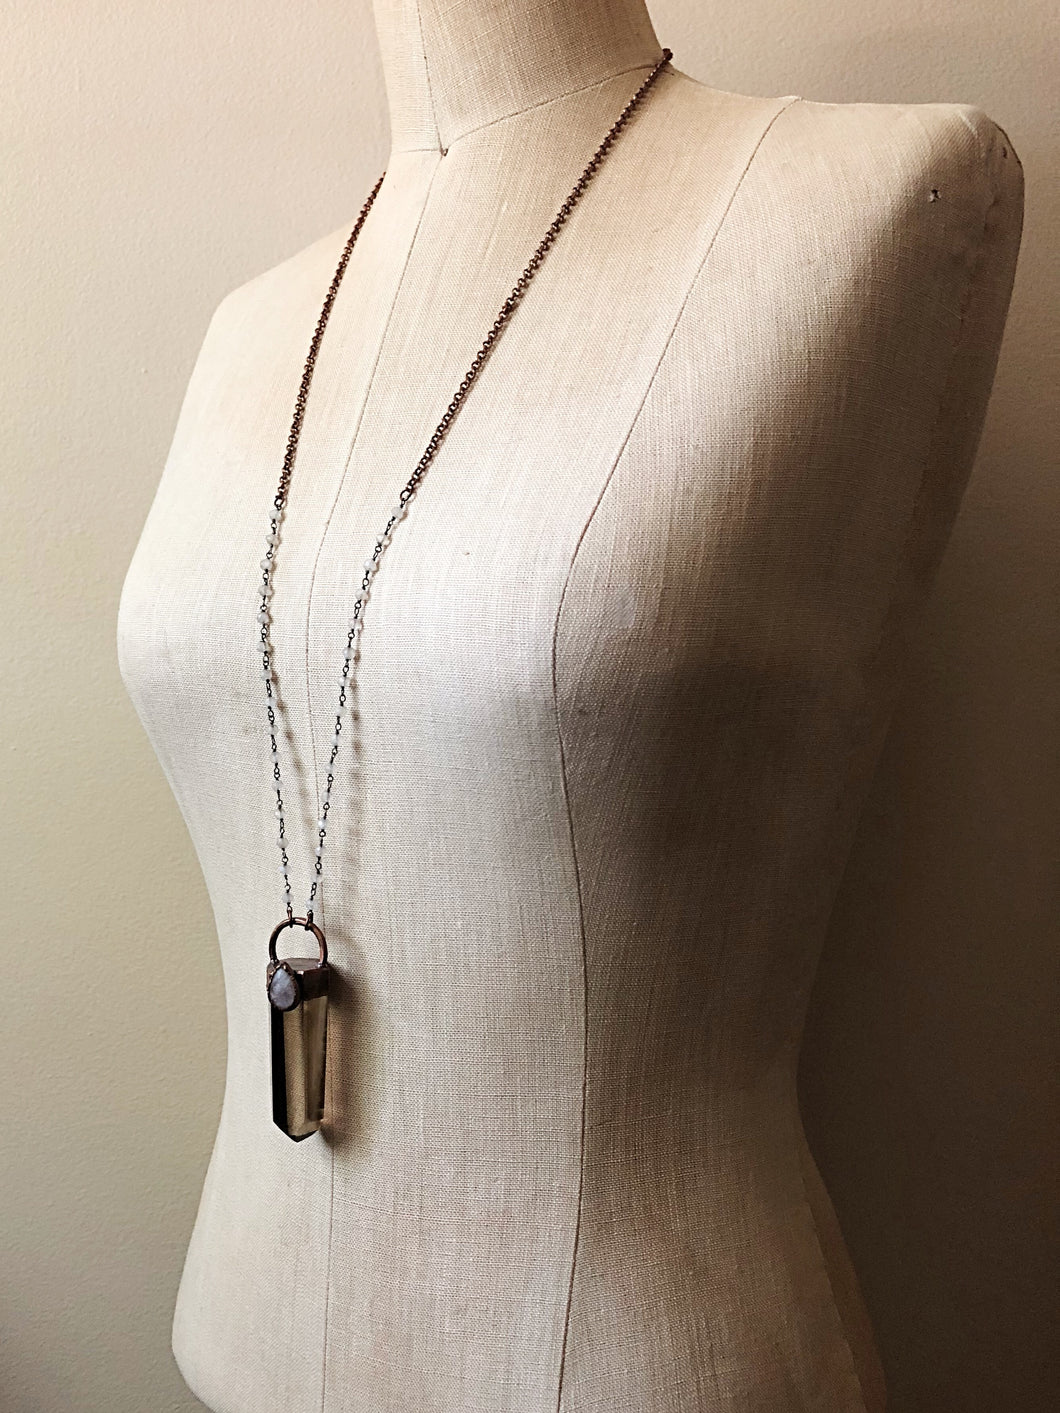 Smoky Quartz Point with Rainbow Moonstone Necklace - Ready to Ship (Flower Moon Collection)